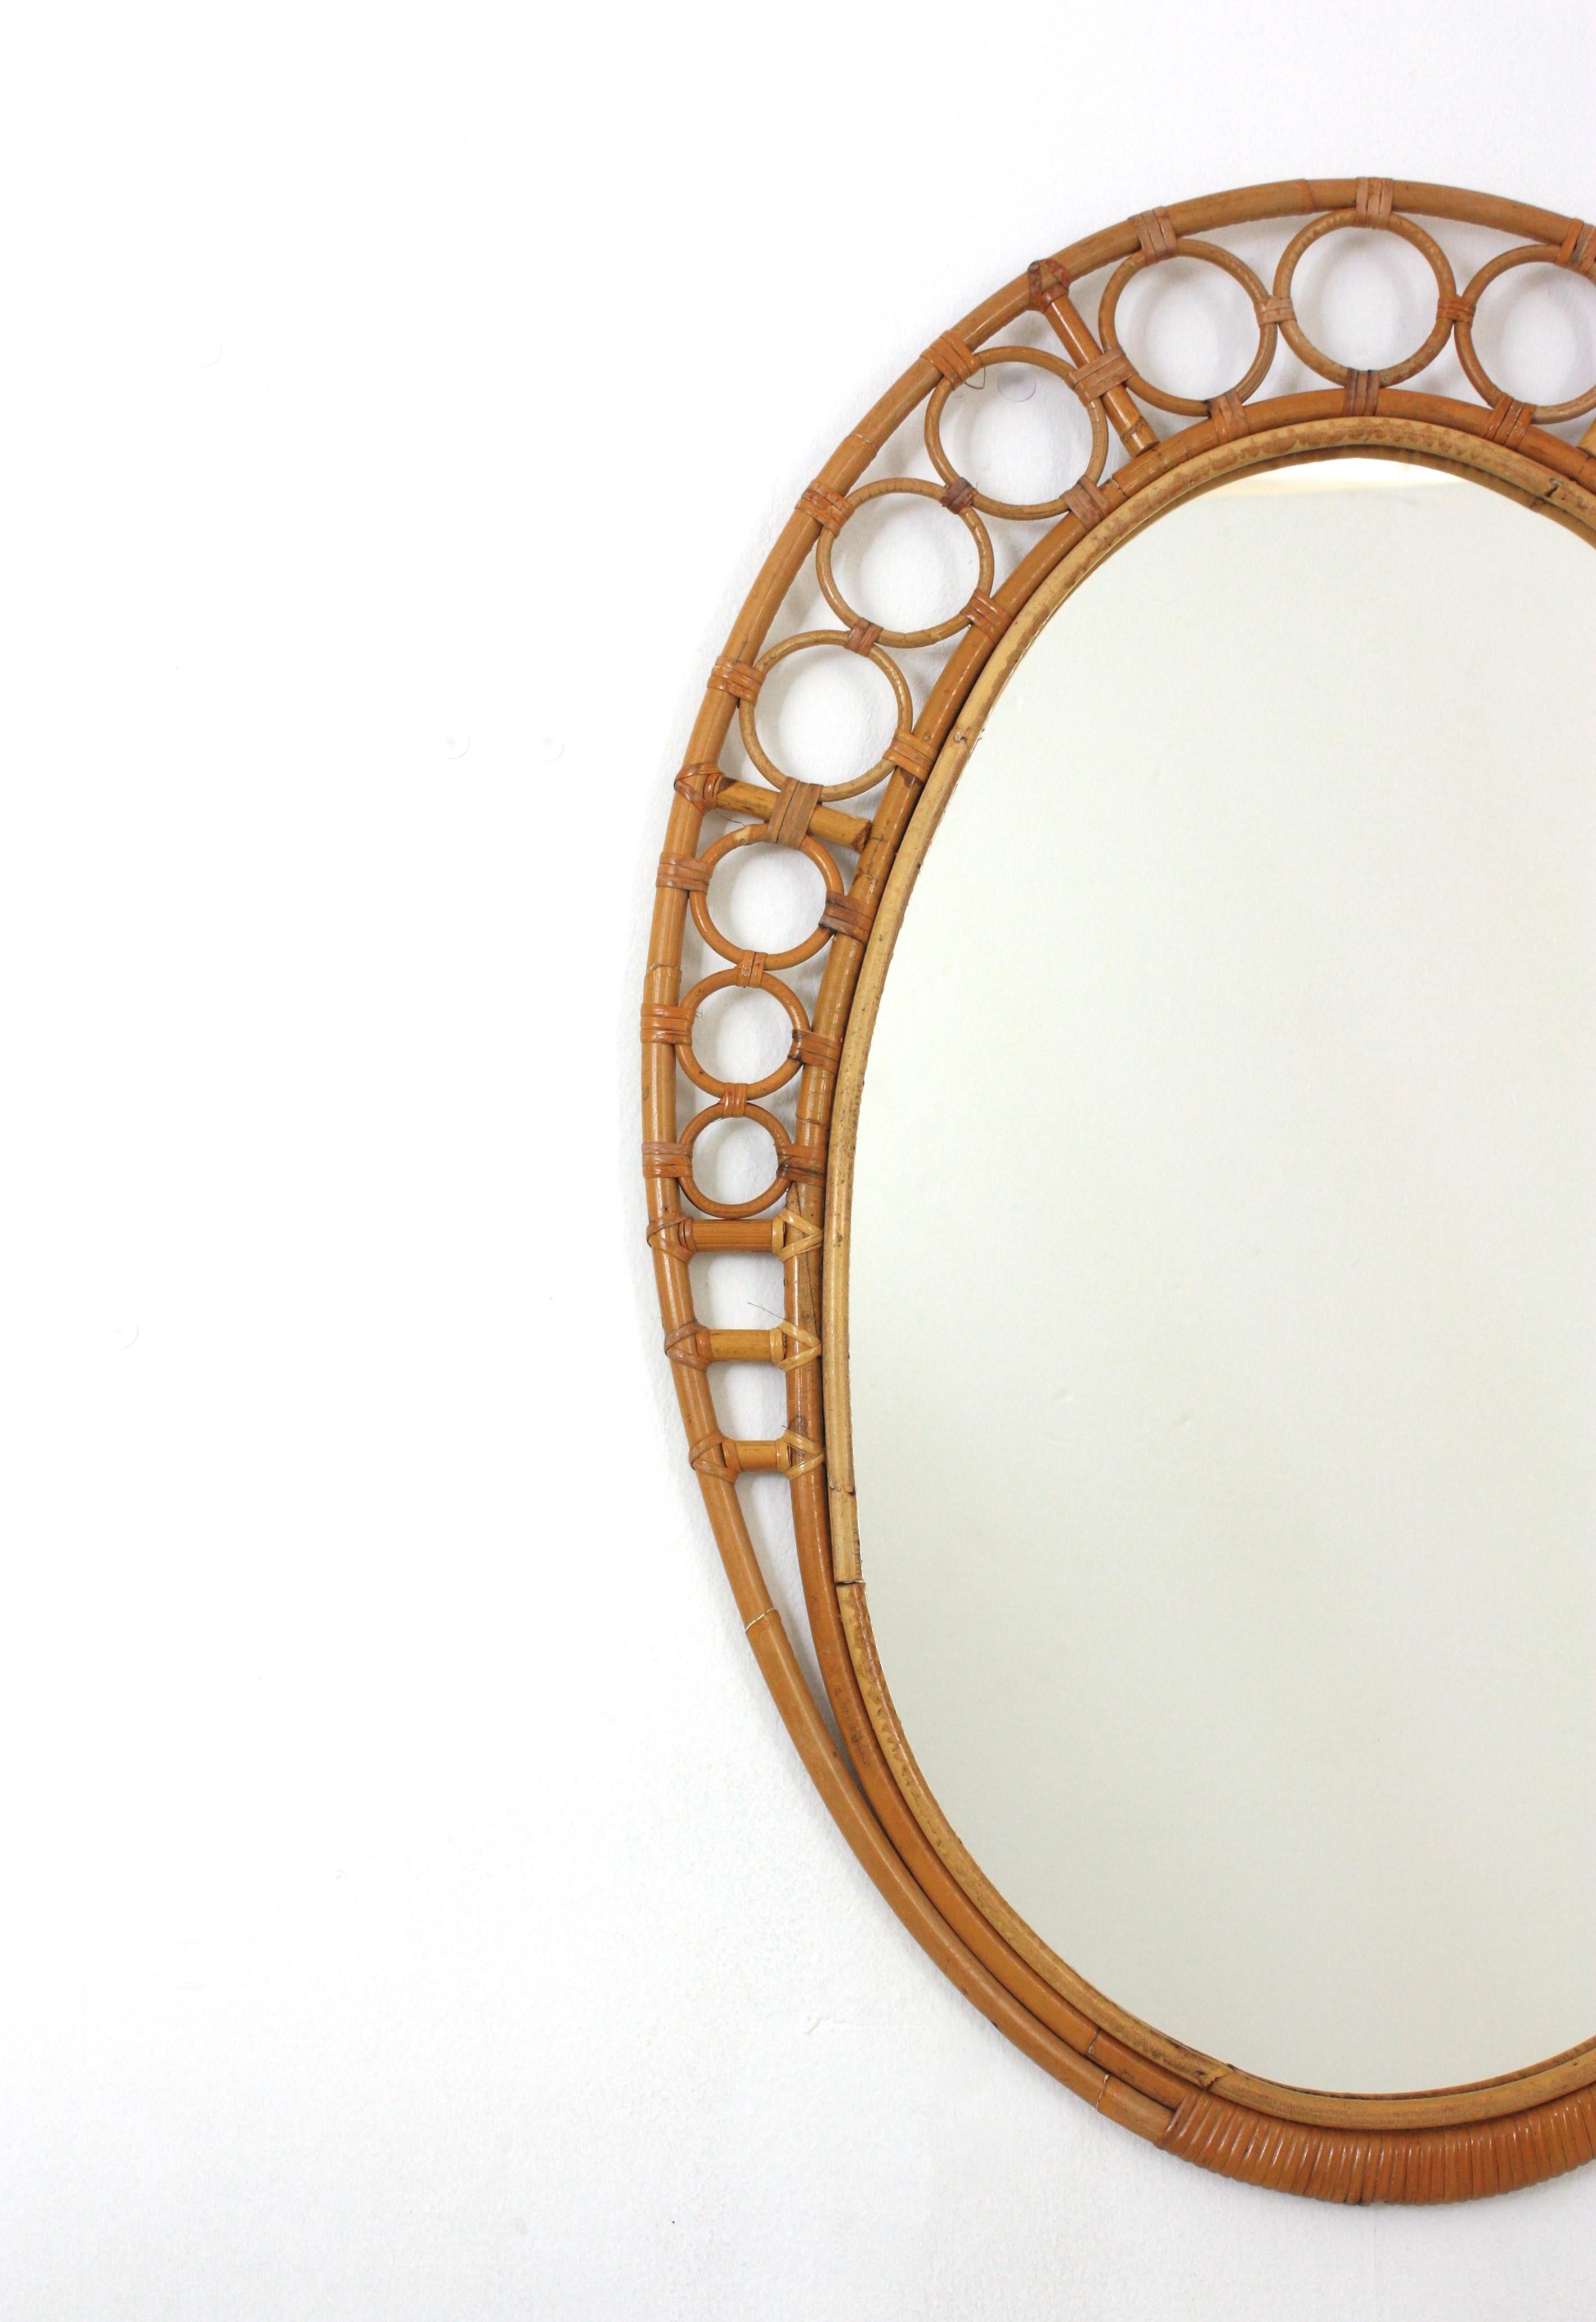 Mid-Century Modern Bamboo Rattan Oval Mirror with Rings Frame, 1960s For Sale